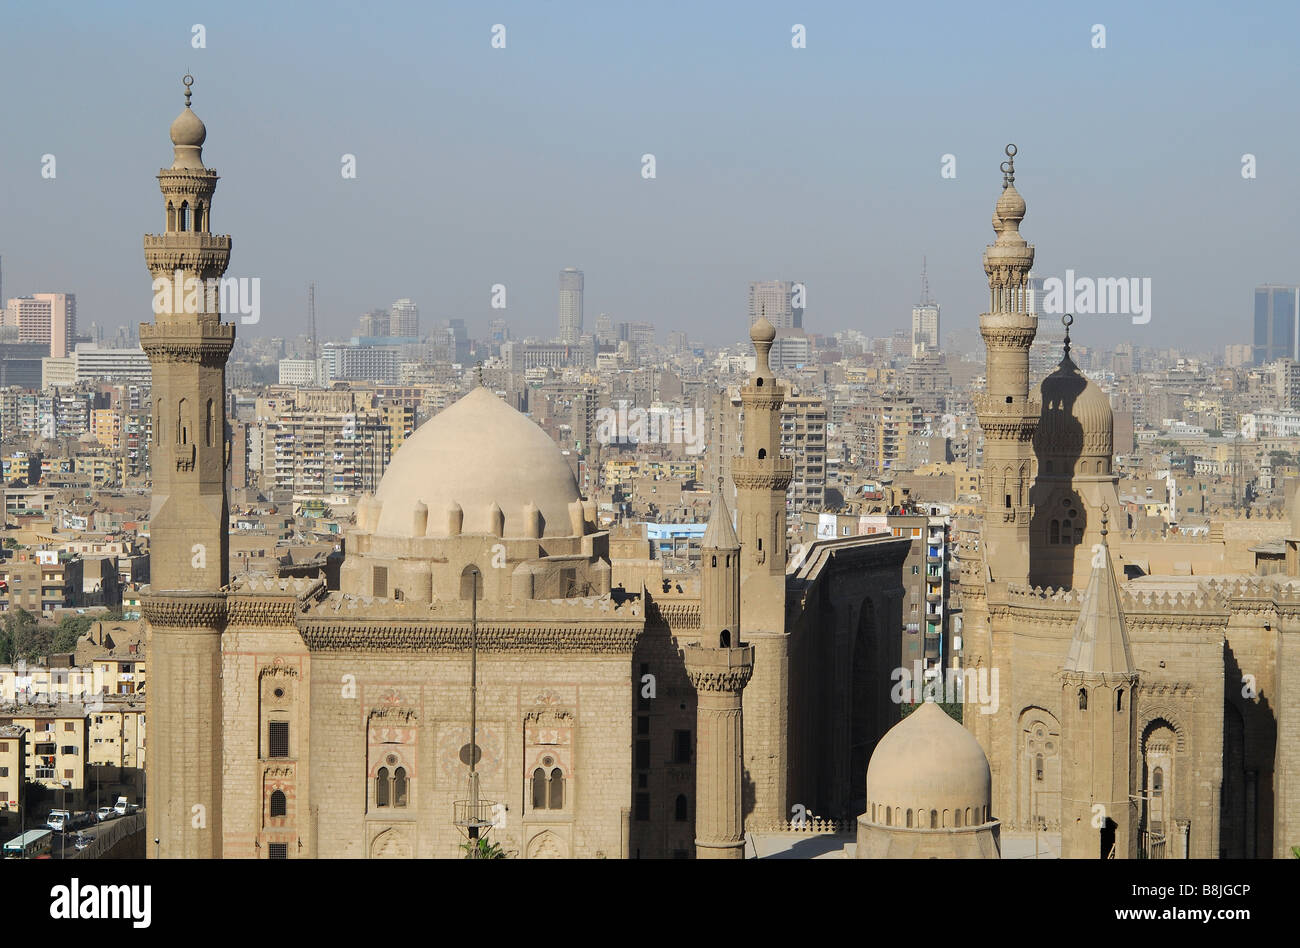 CAIRO, EGYPT. The Sultan Hassan and Rifai Mosques as seen from the Citadel. Stock Photo